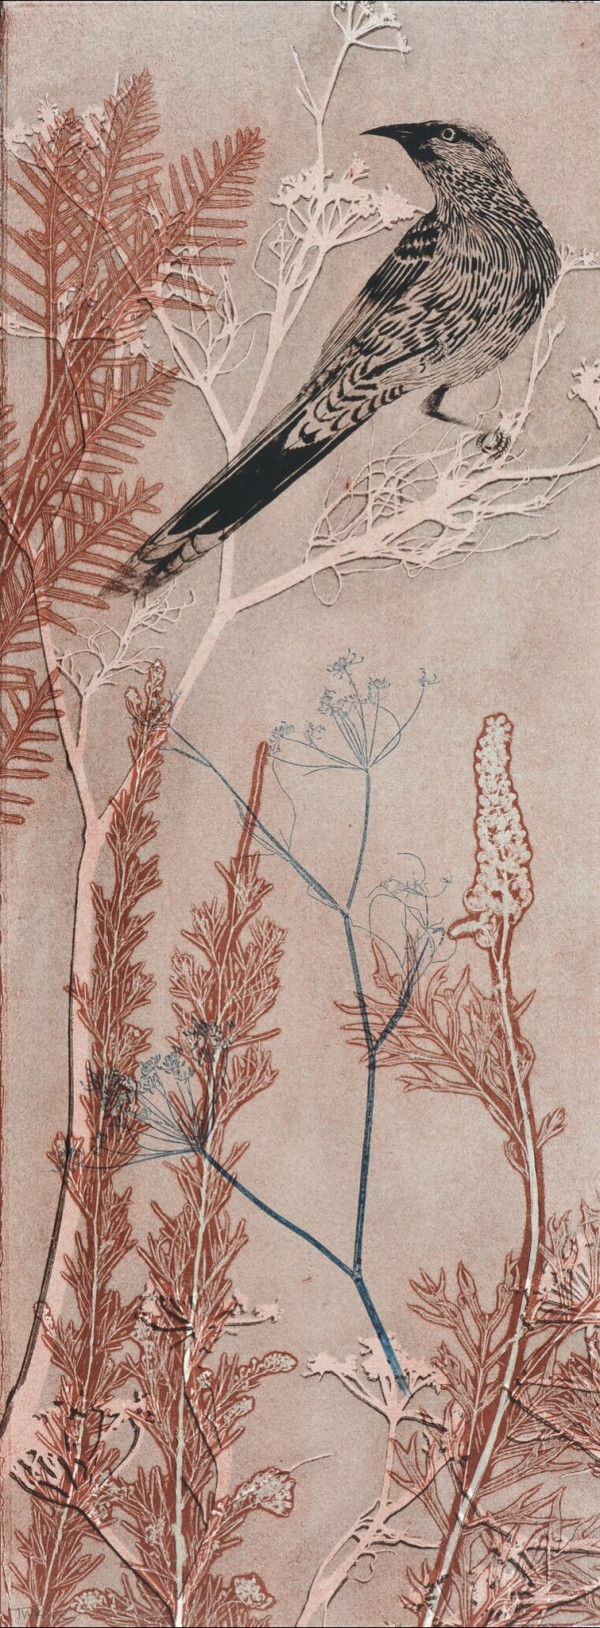 The wattle bird listening to the sounds of the dawn by Trudy Rice